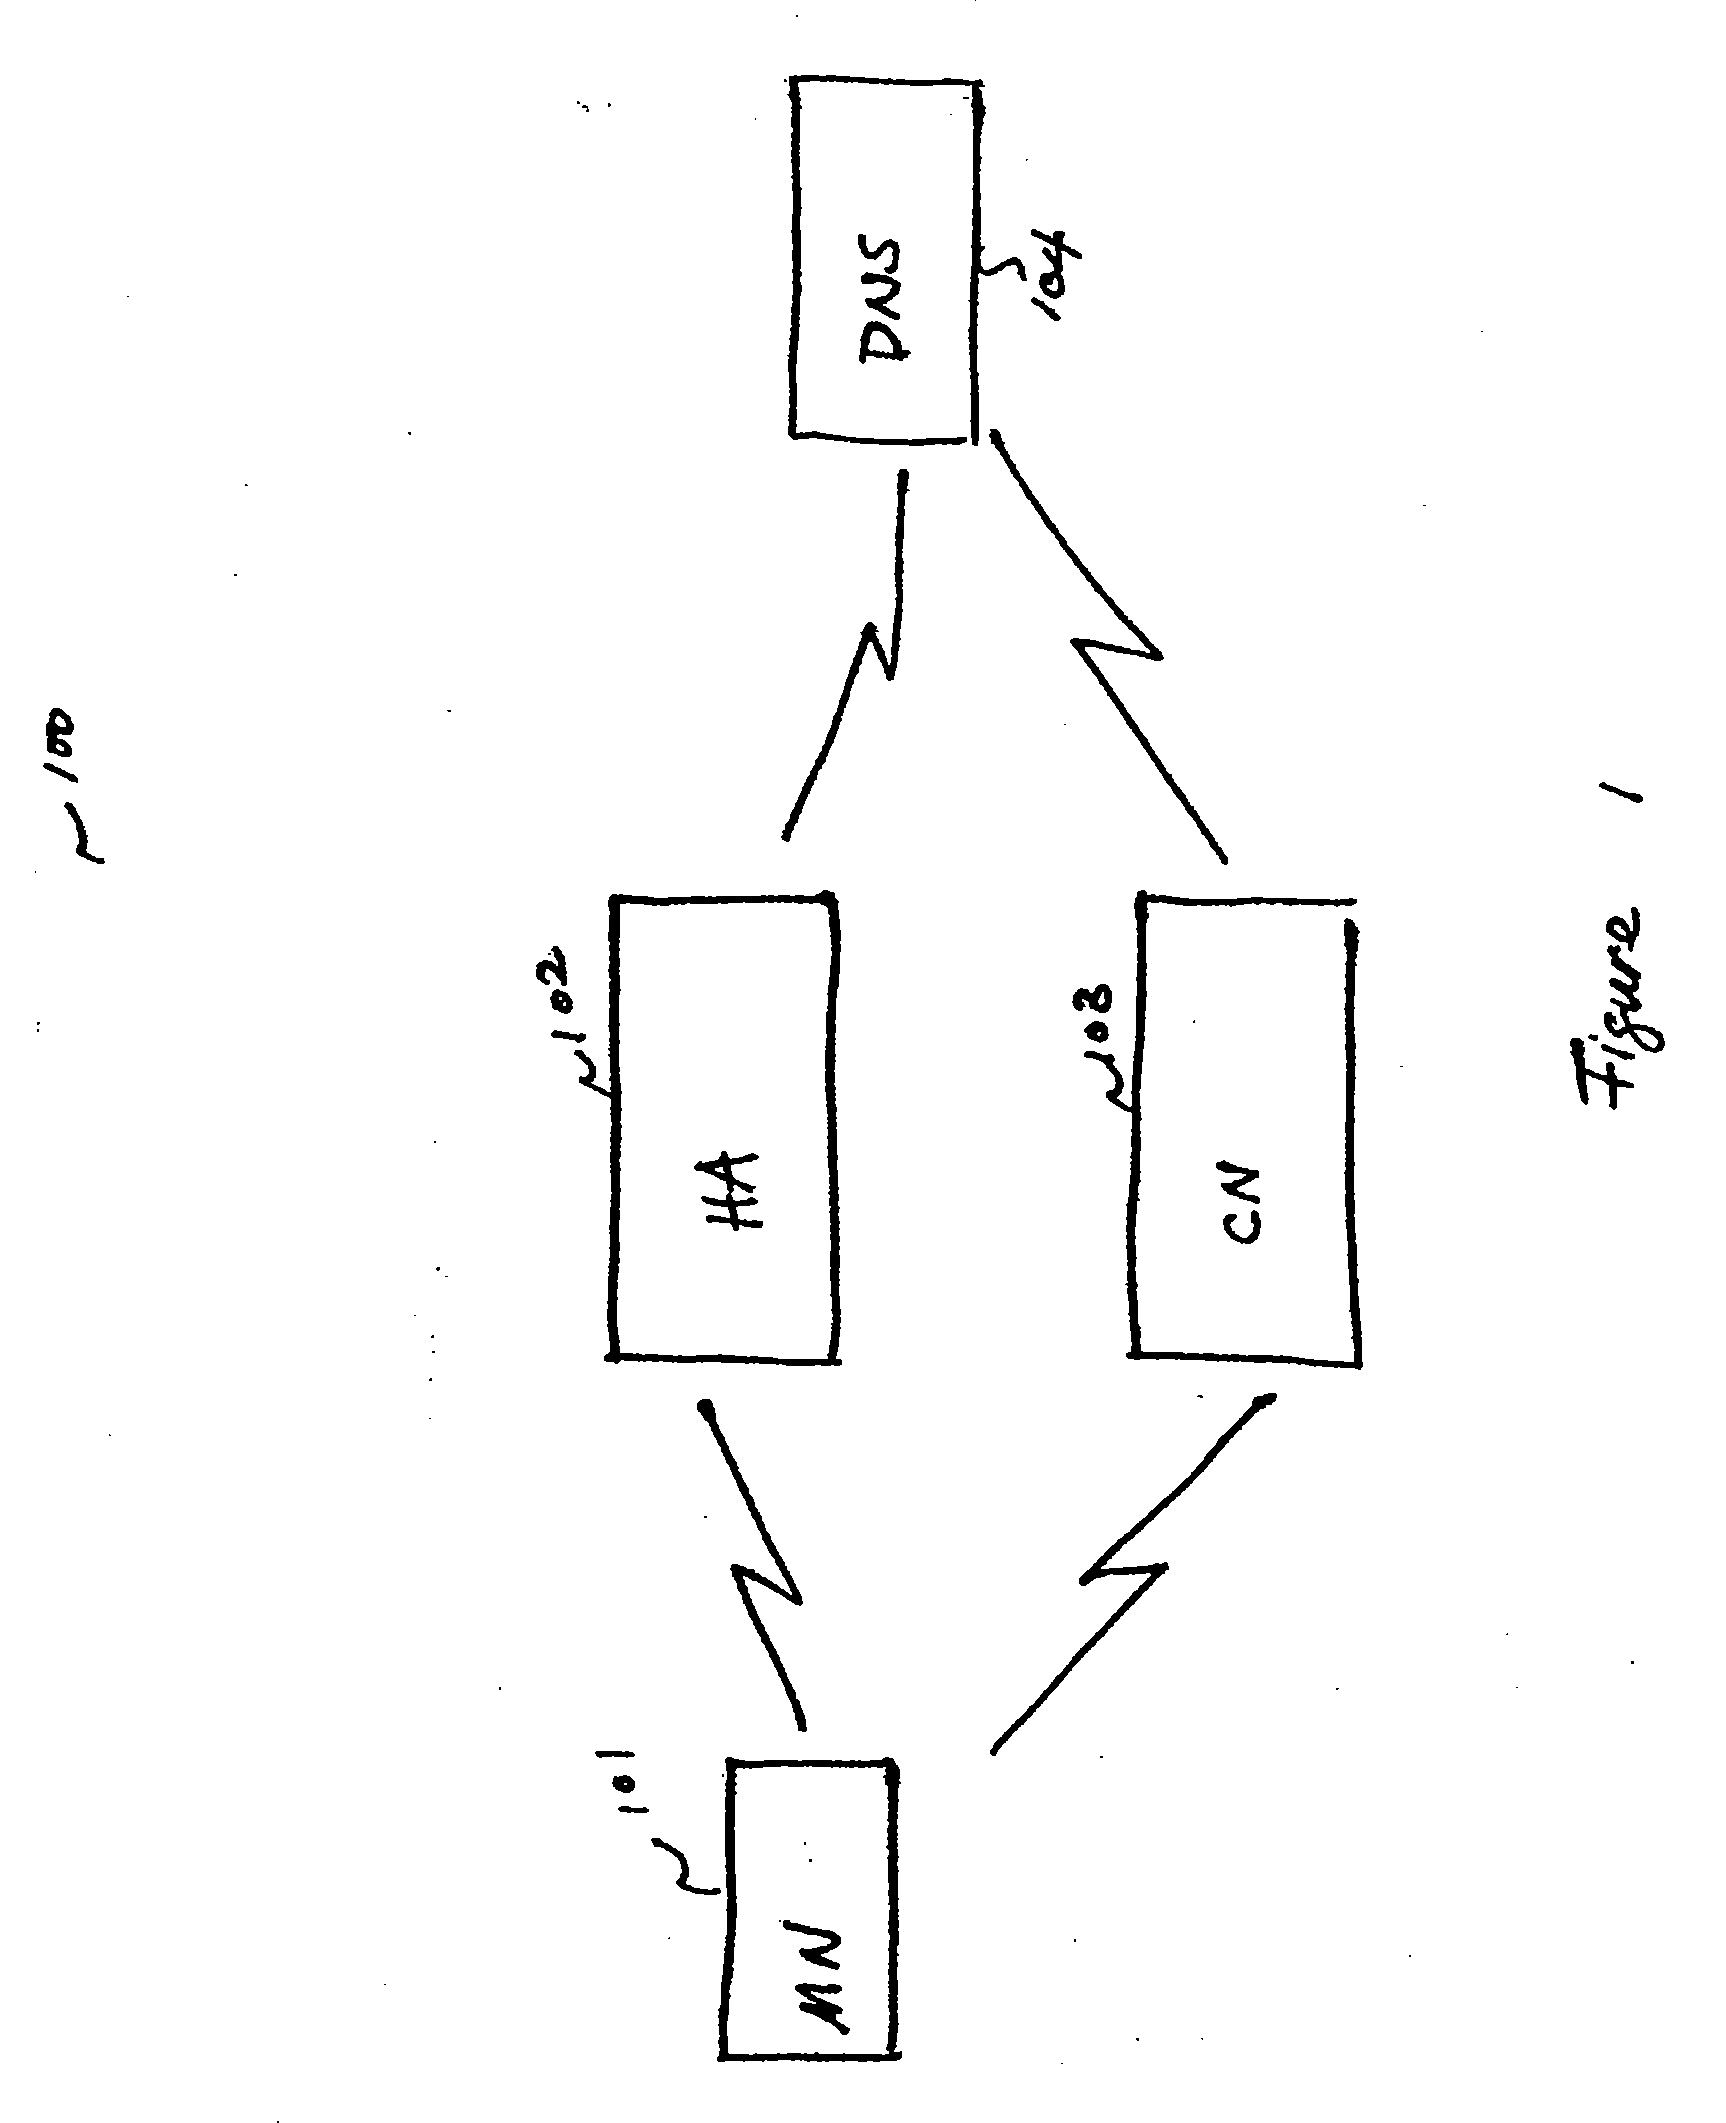 Method and system for providing system information in a communication network